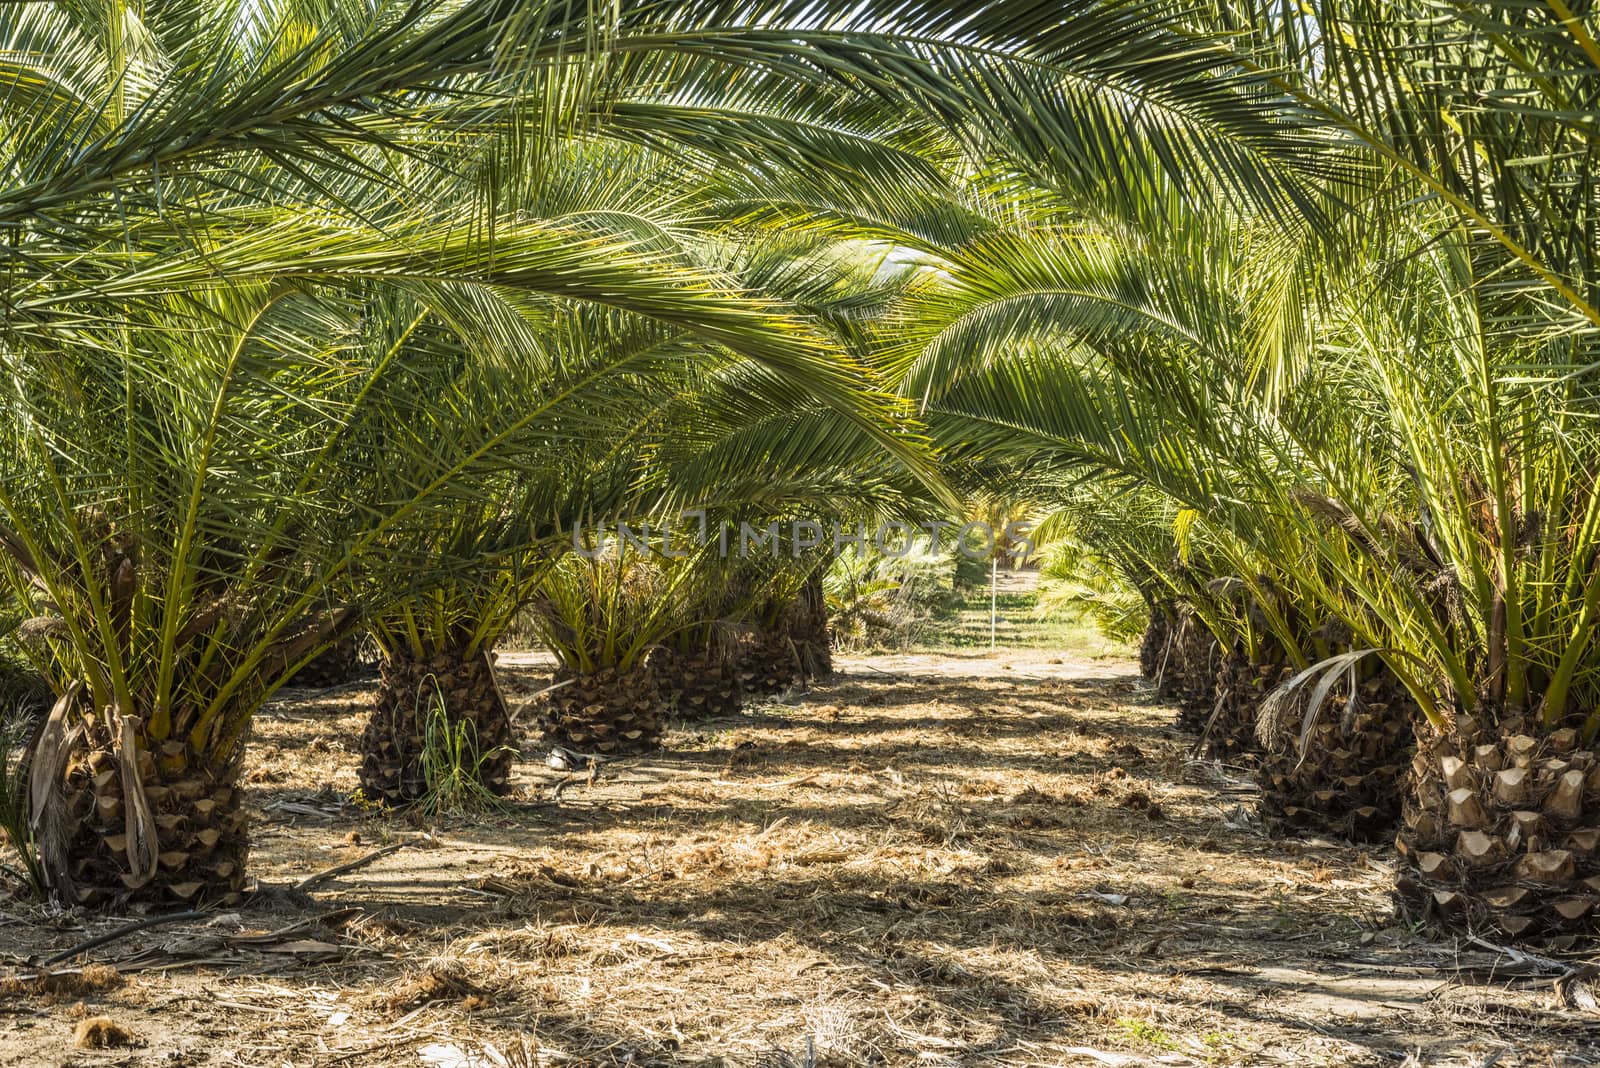 Rows of small palm trees in a palm tree farm by Njean